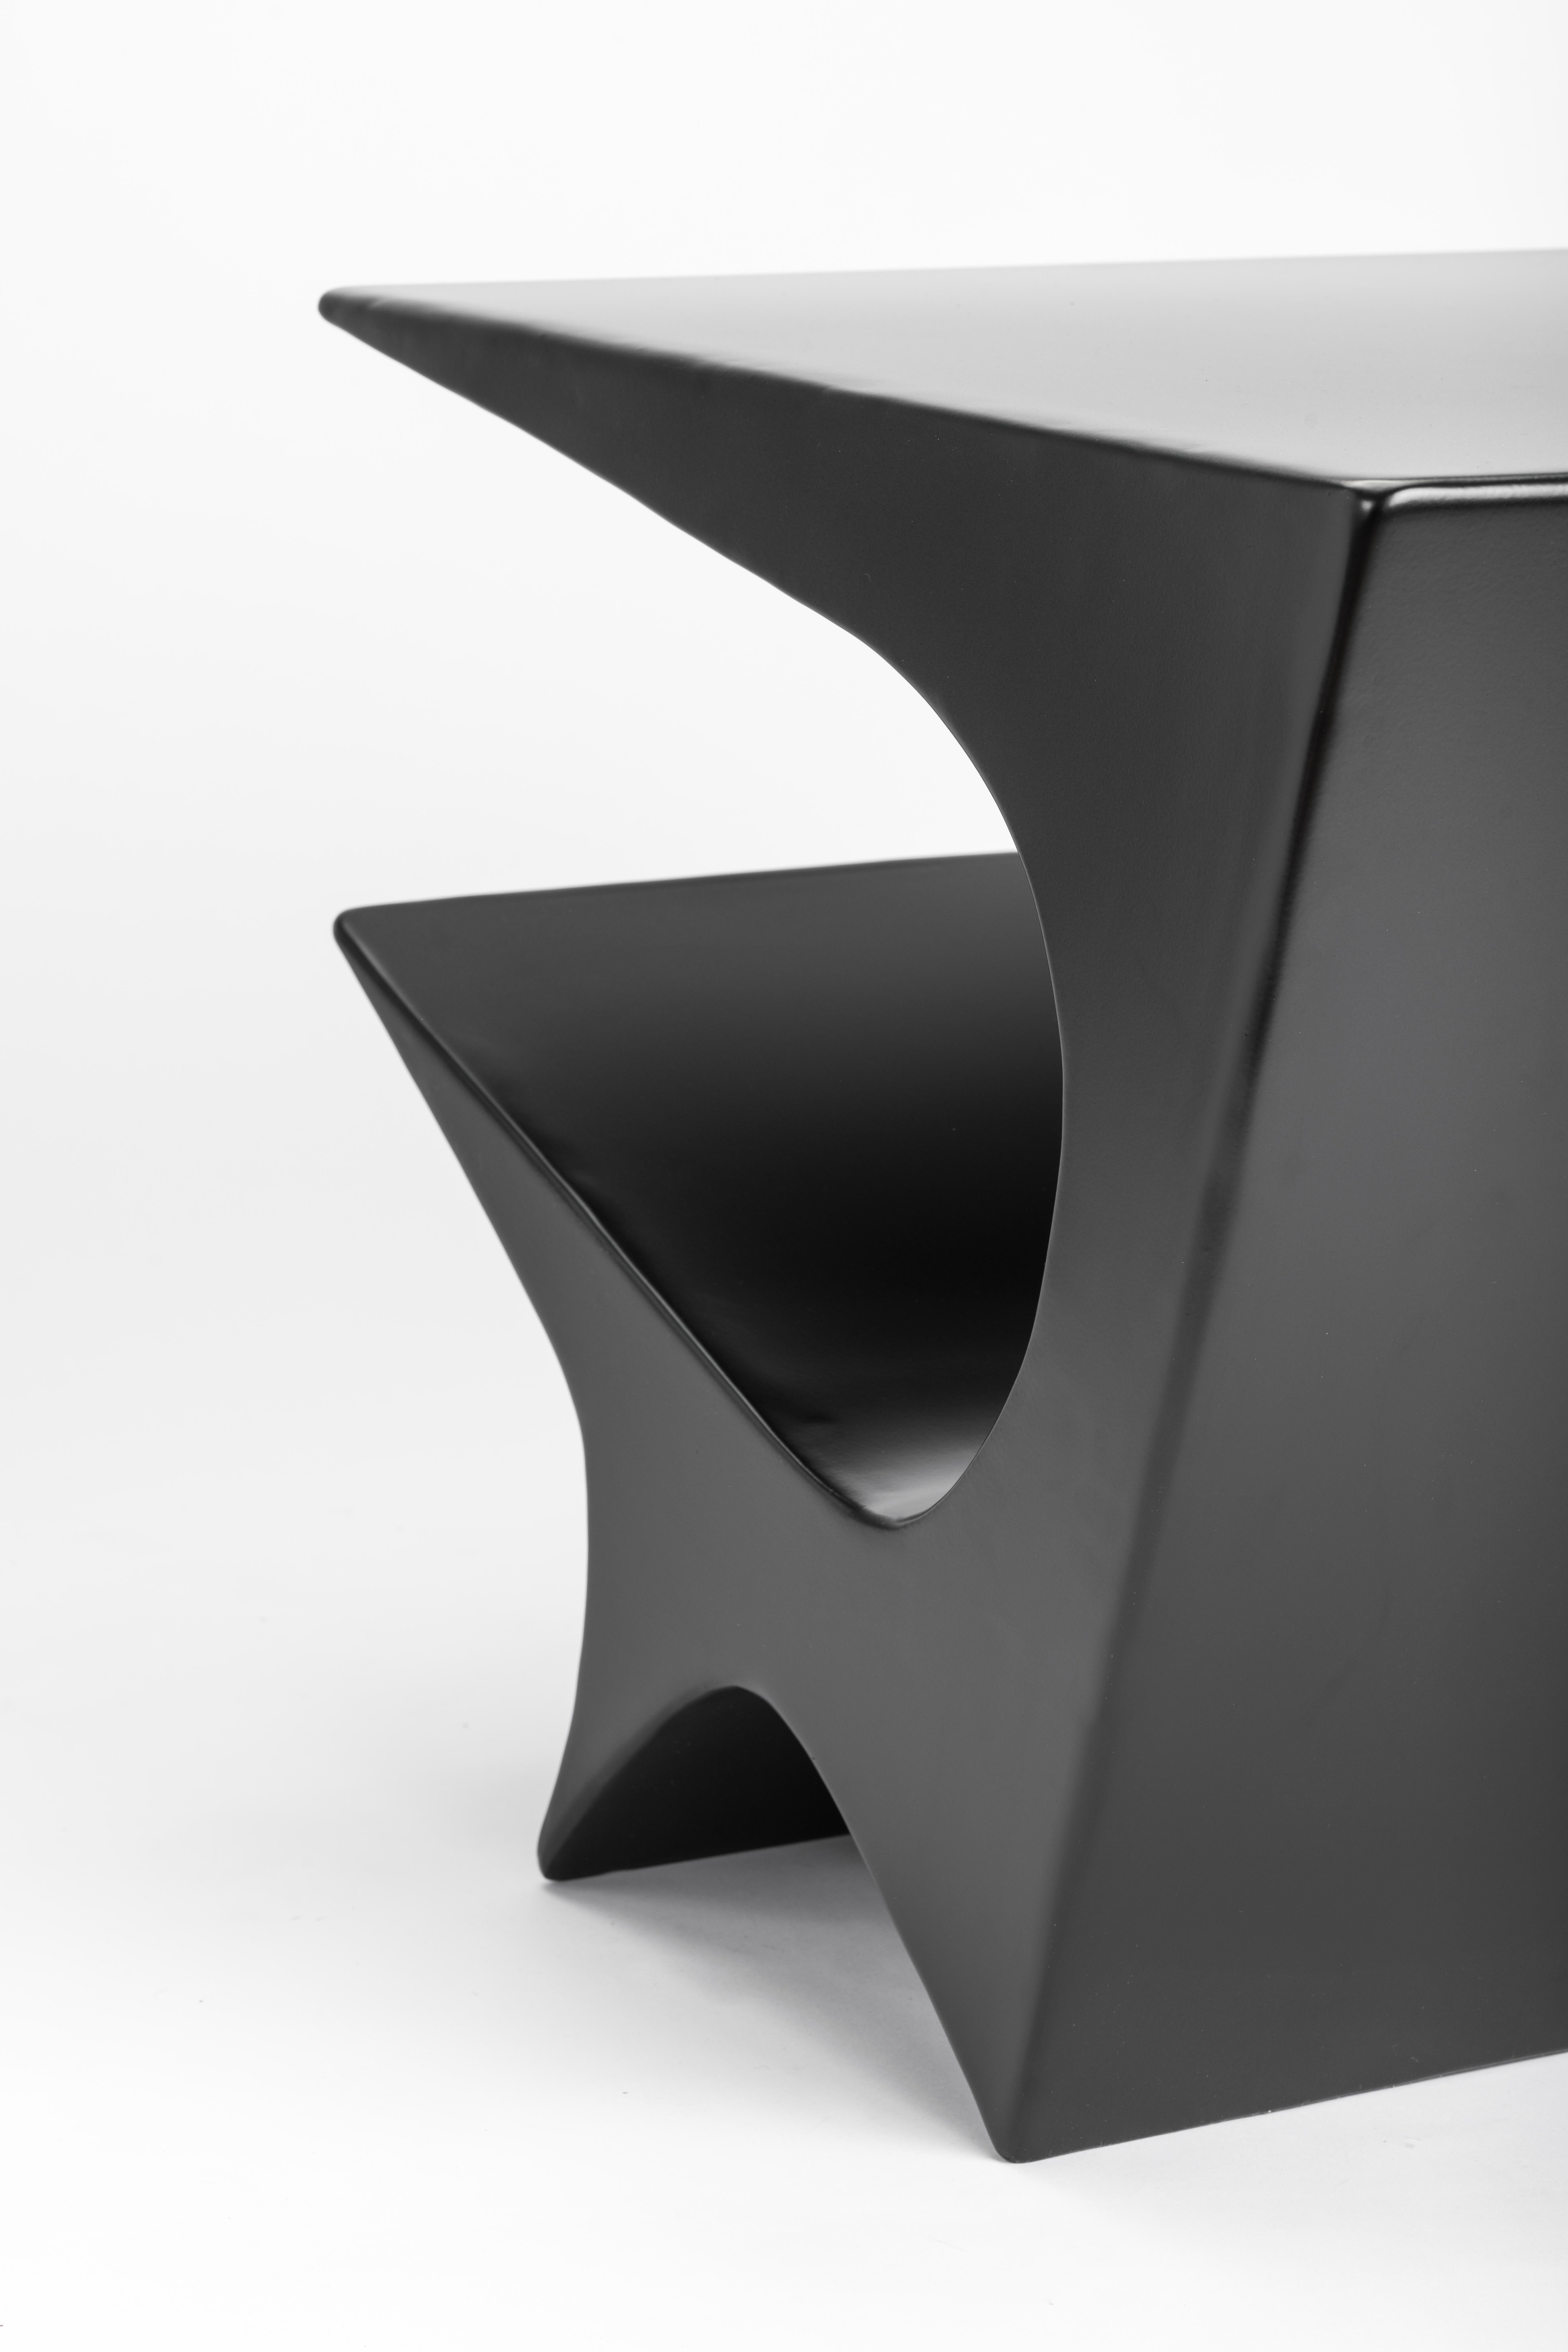 Star Axis Side Table in Black Aluminum by Neal Aronowitz For Sale 12